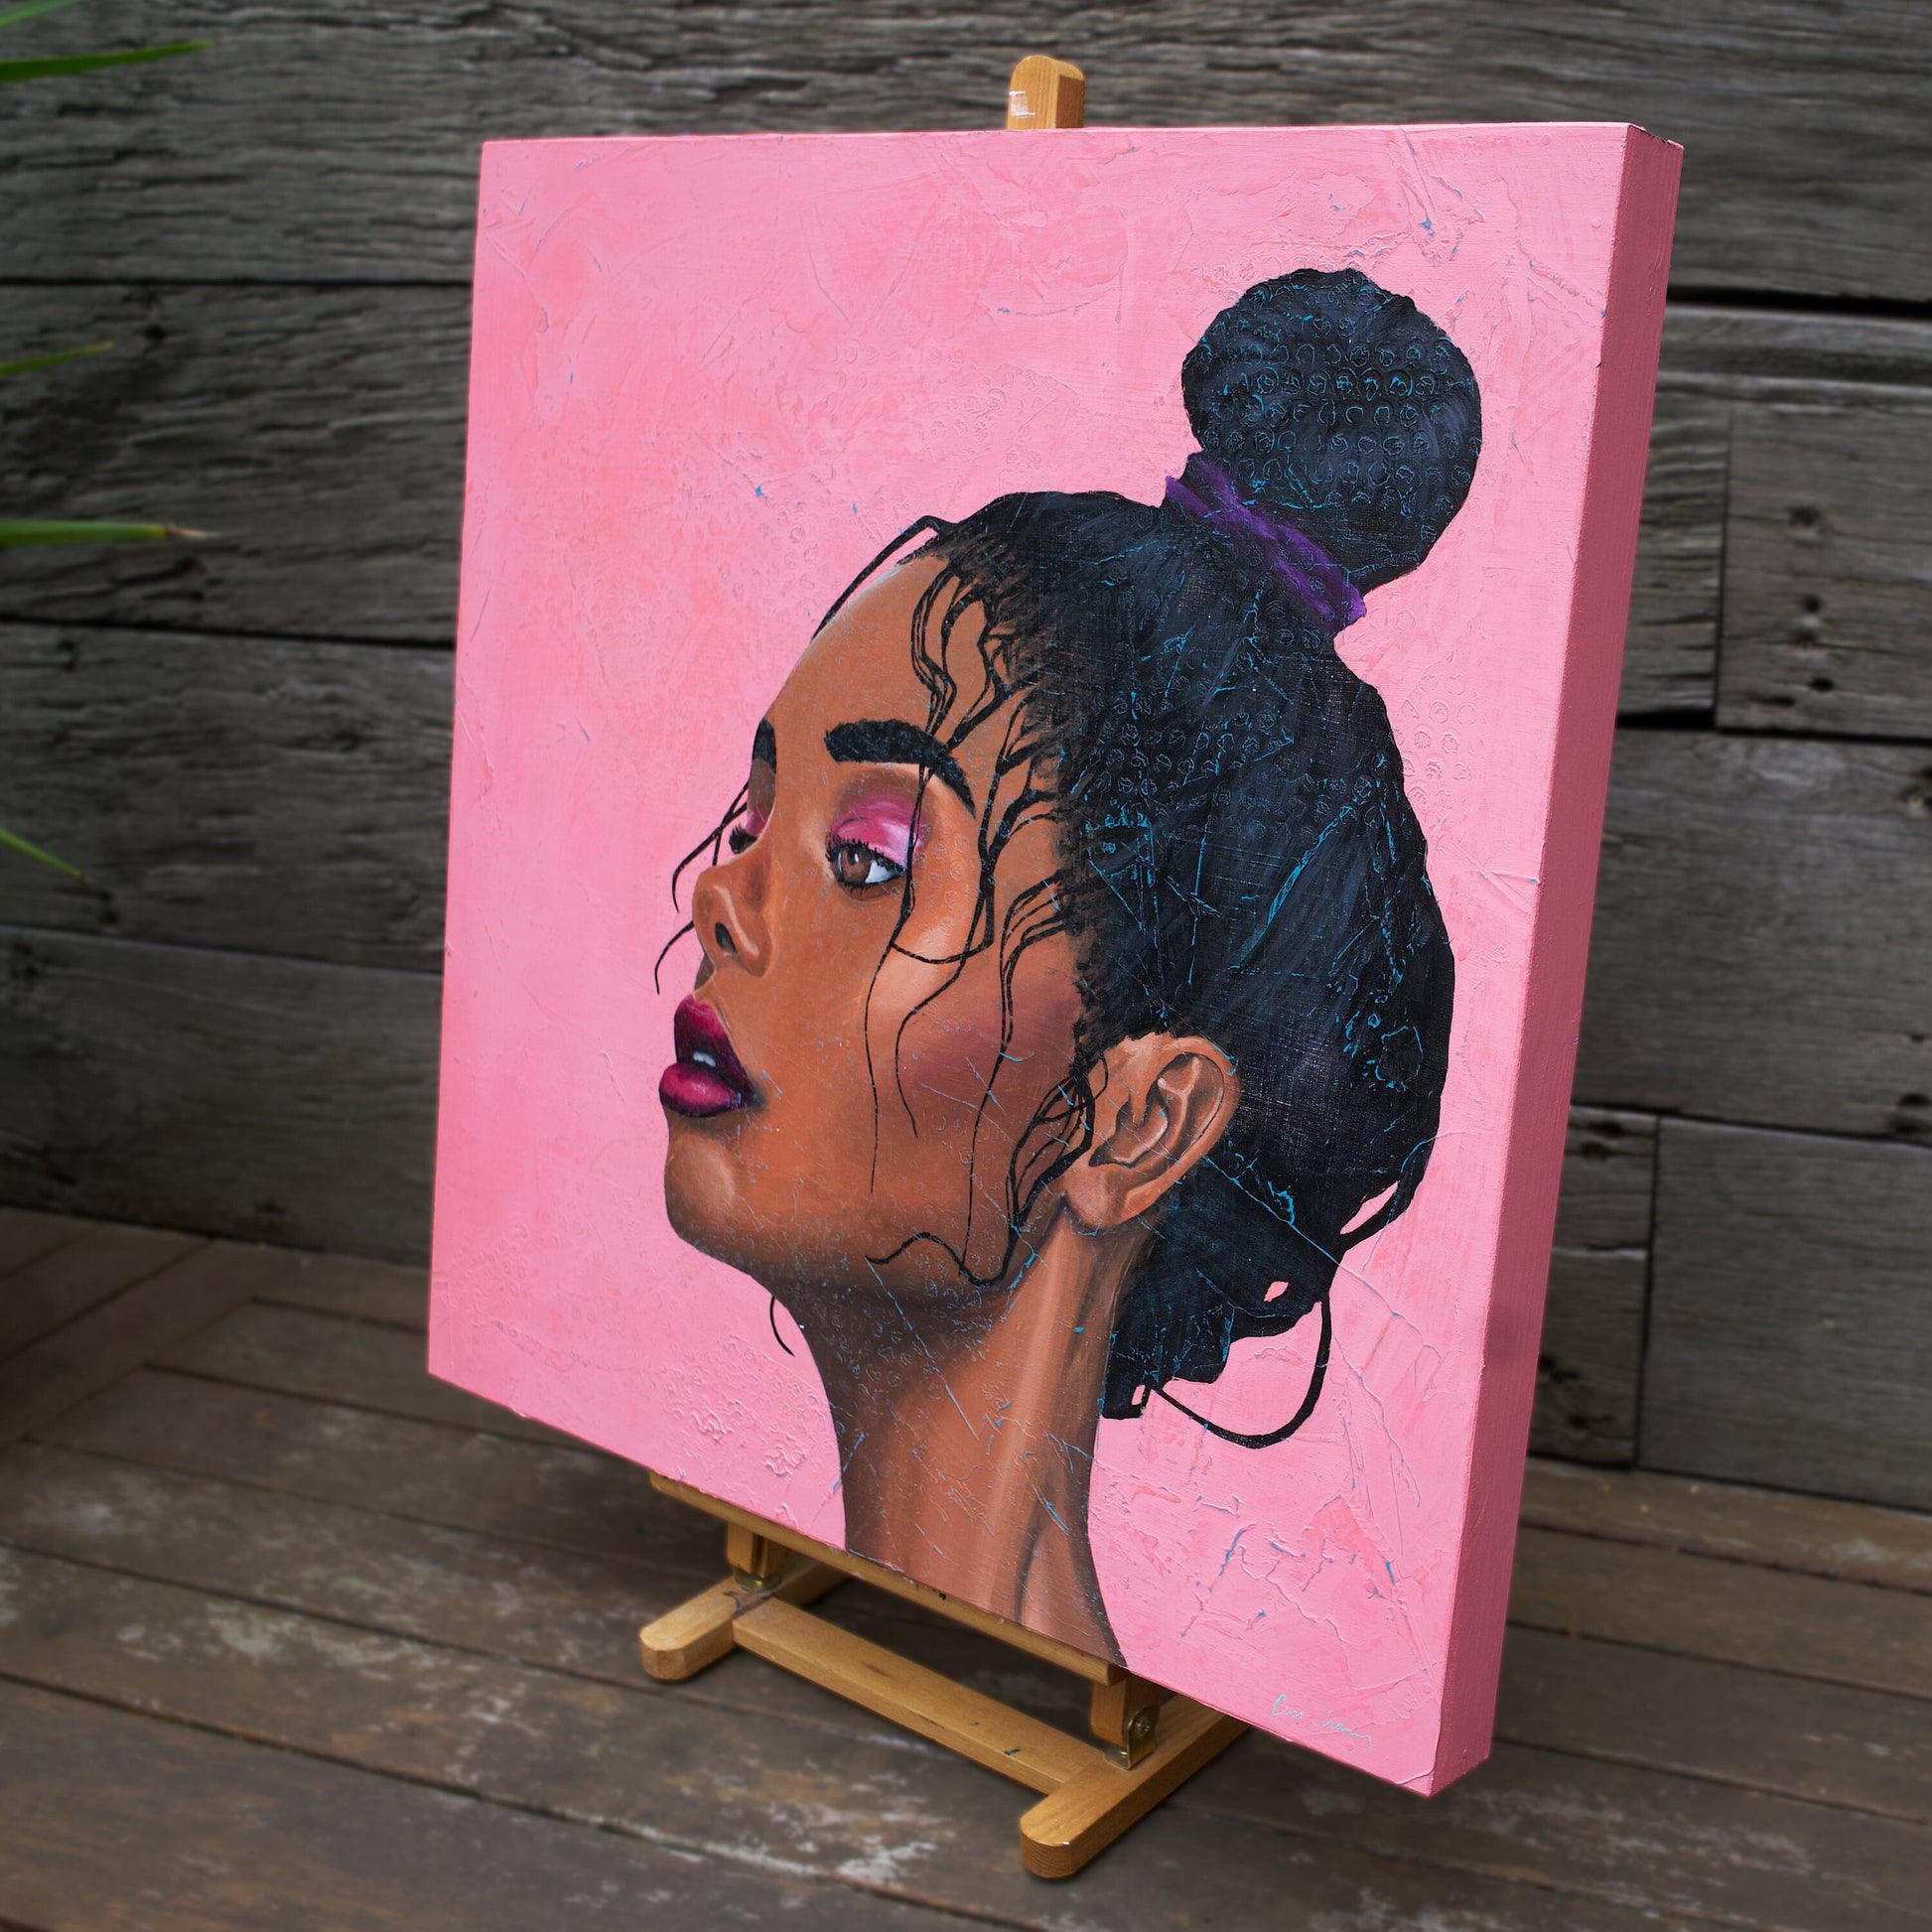 art melbourne paintings for sale portrait painting of Beautiful Black Woman on pink background melbourne wall art